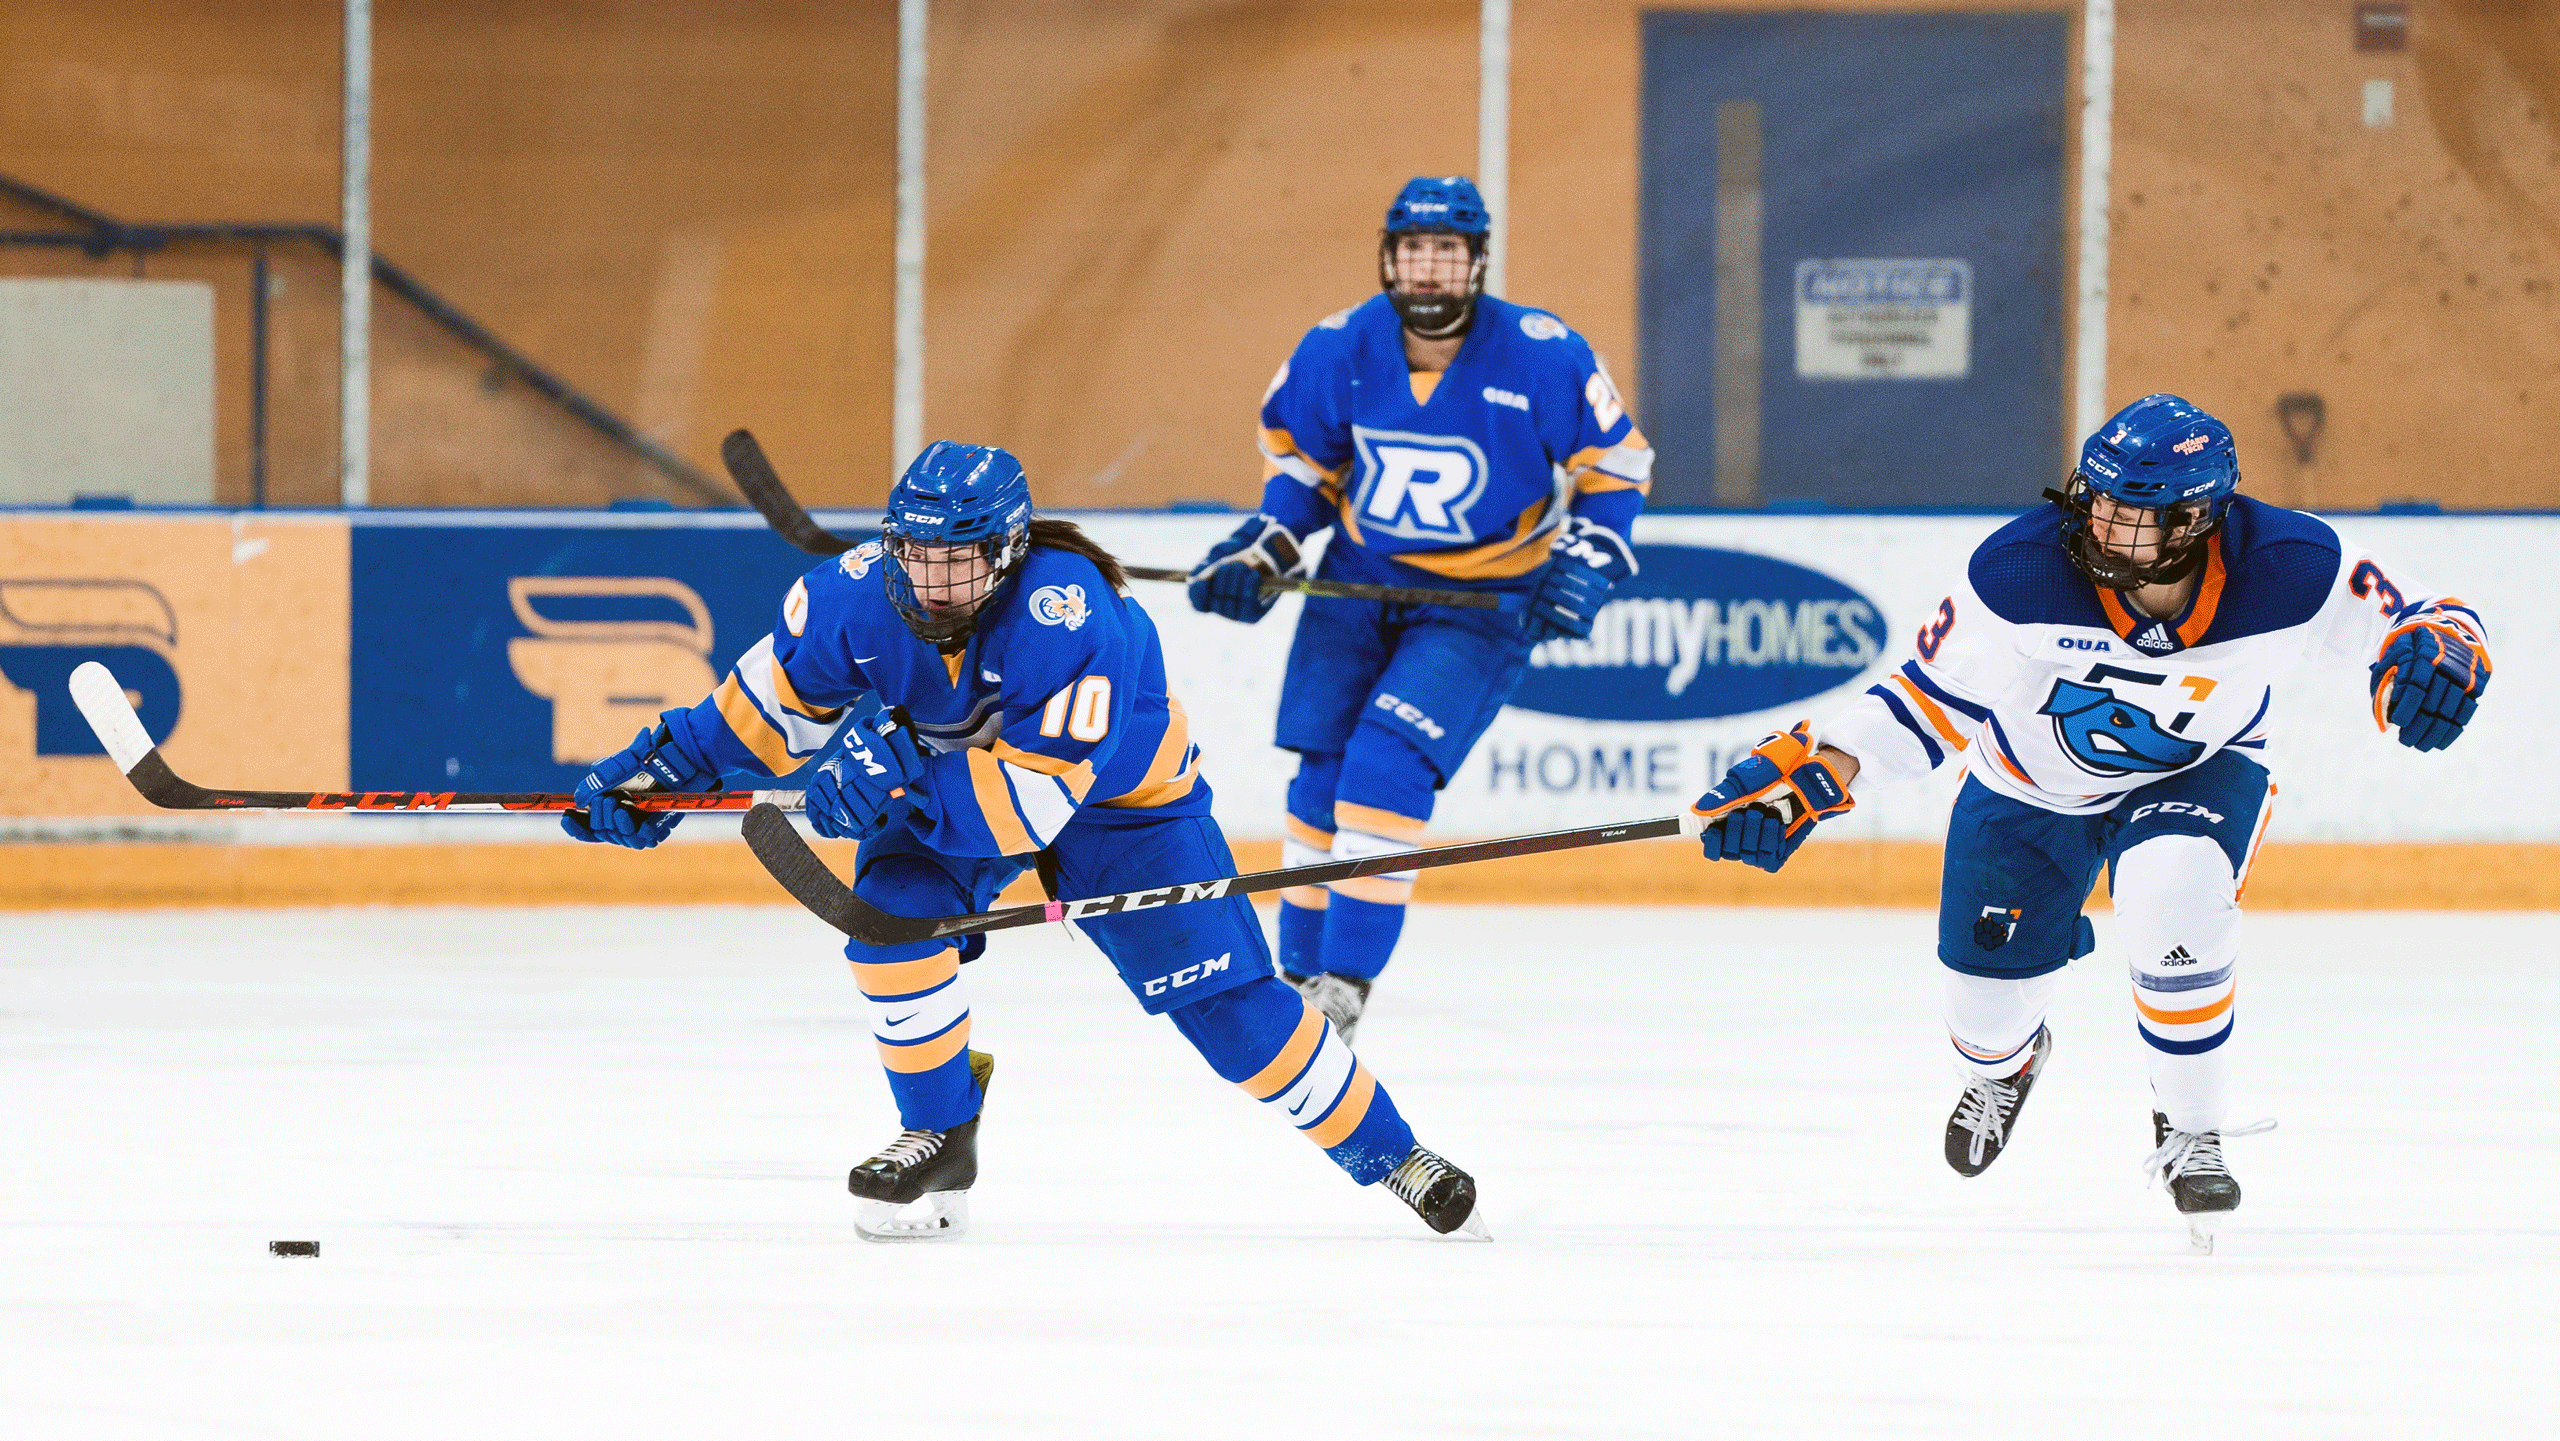 A hockey player in a blue jersey skates toward the puck